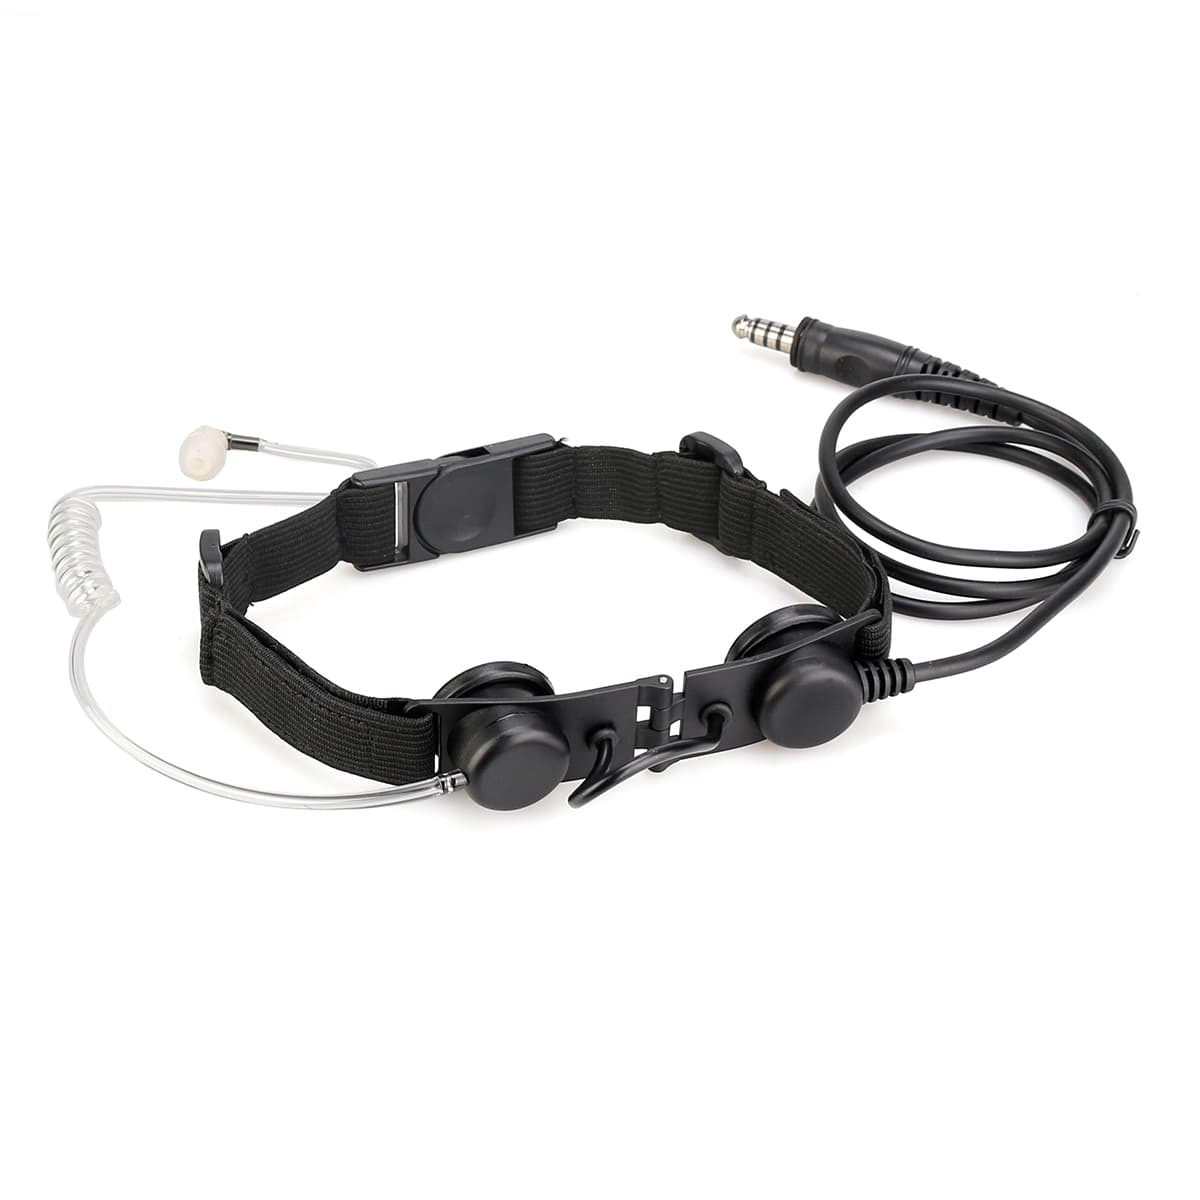 Midland LXT210 Tactical Throat Microphone